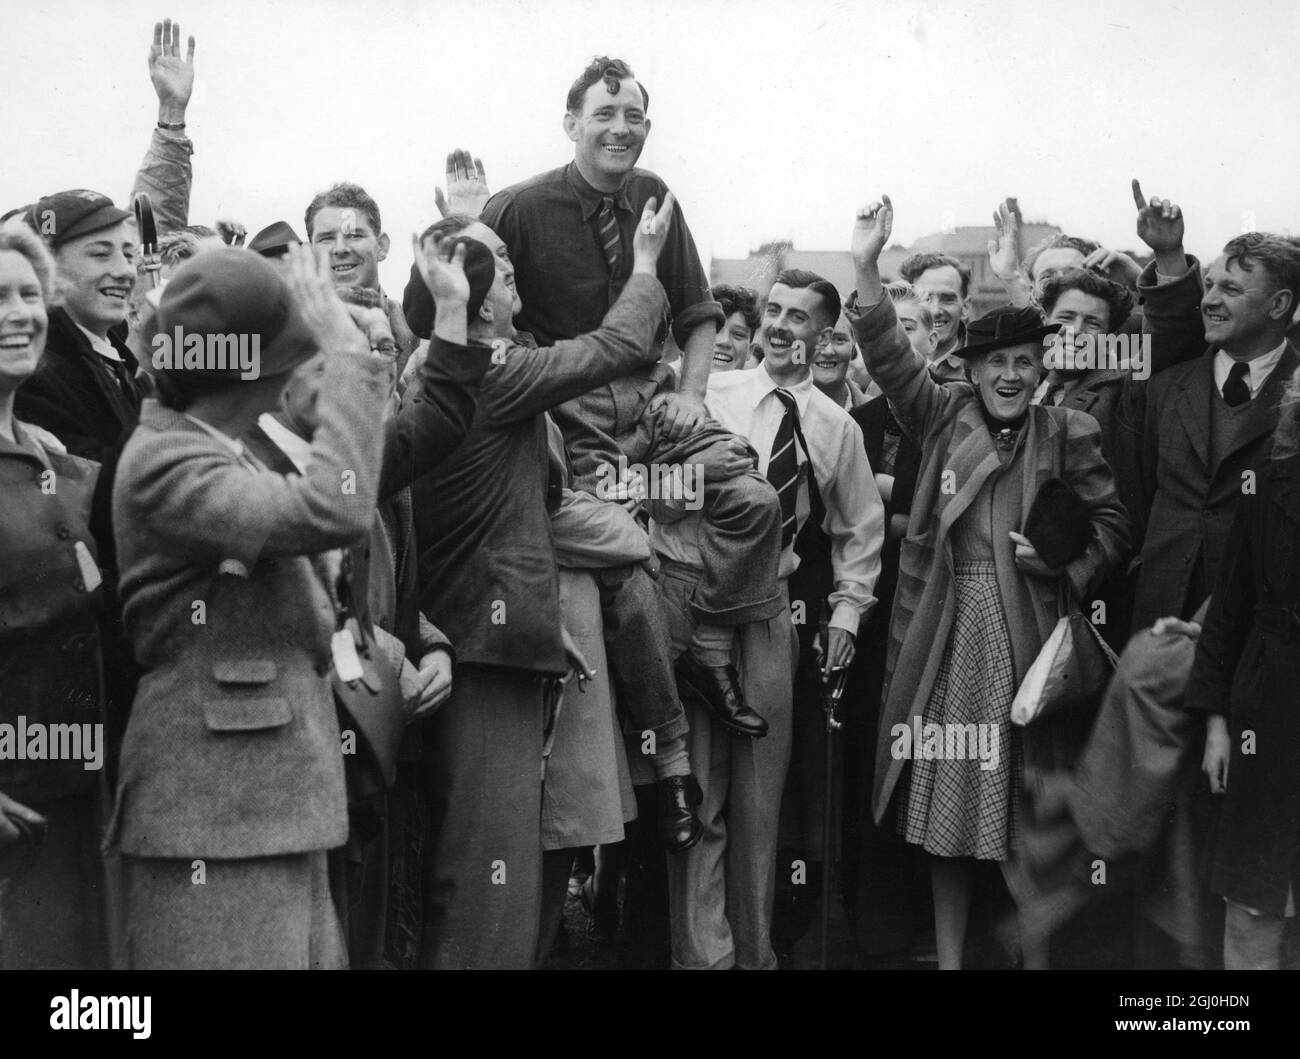 Irishman wins British Open Golf Championship at Hoylake - Stranahan nearly ties ... Fred Daly, 35 year old Ulsterman, who made history by becoming the first Irish-born golfer ever to win the title, is seen here chaired by well-wishers after he had won the British Open Golf Championship at Hoylake. He won by a single stroke from the American amateur Frank Stranahan - 5th July 1947 - ©TopFoto Stock Photo